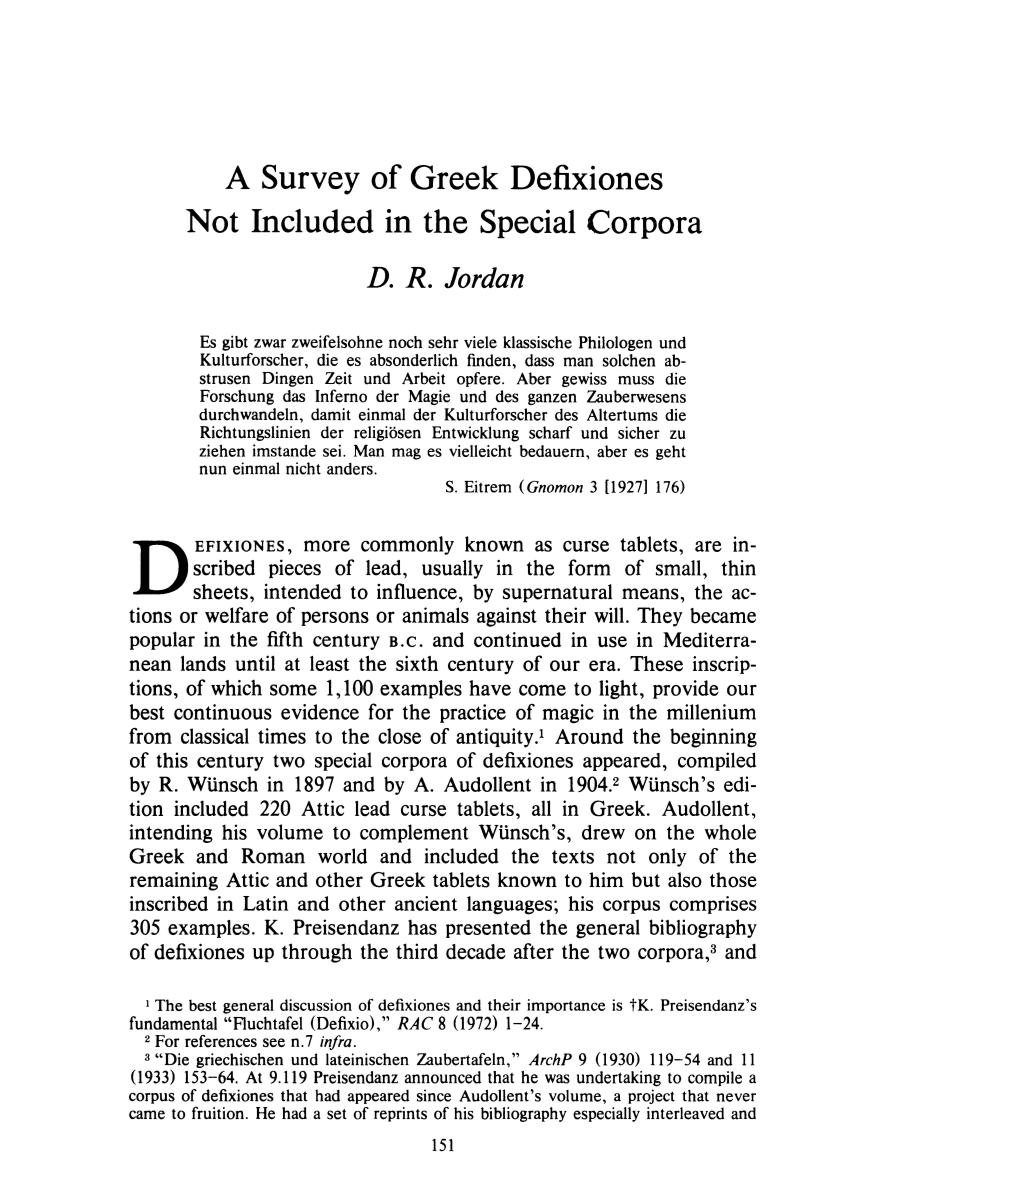 A Survey of Greek Defixiones Not Included in the Special Corpora , Greek, Roman and Byzantine Studies, 26:2 (1985:Summer) P.151